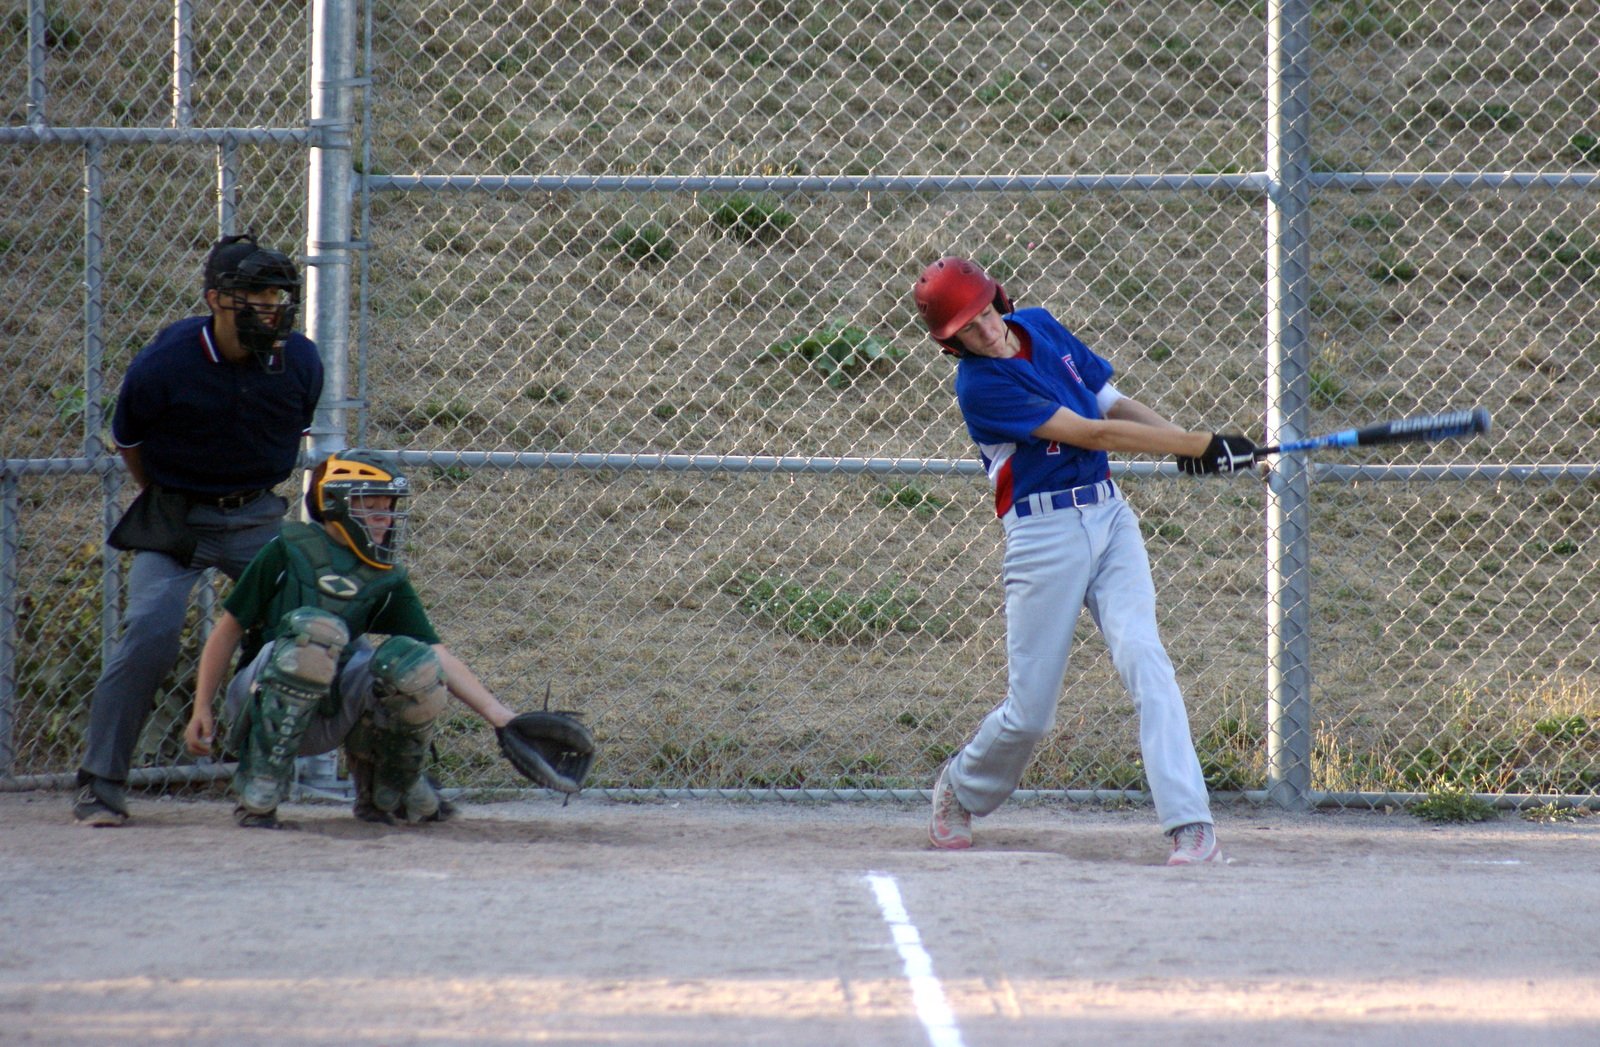 Alden (7) delivers a majestic two run home run shot over the left field fence in the first inning to give TP a 3-1 lead. In two at bats, Alden went 2 for 2 [home run and single] to power the TP offense with two runs scored and 3 RBI's.